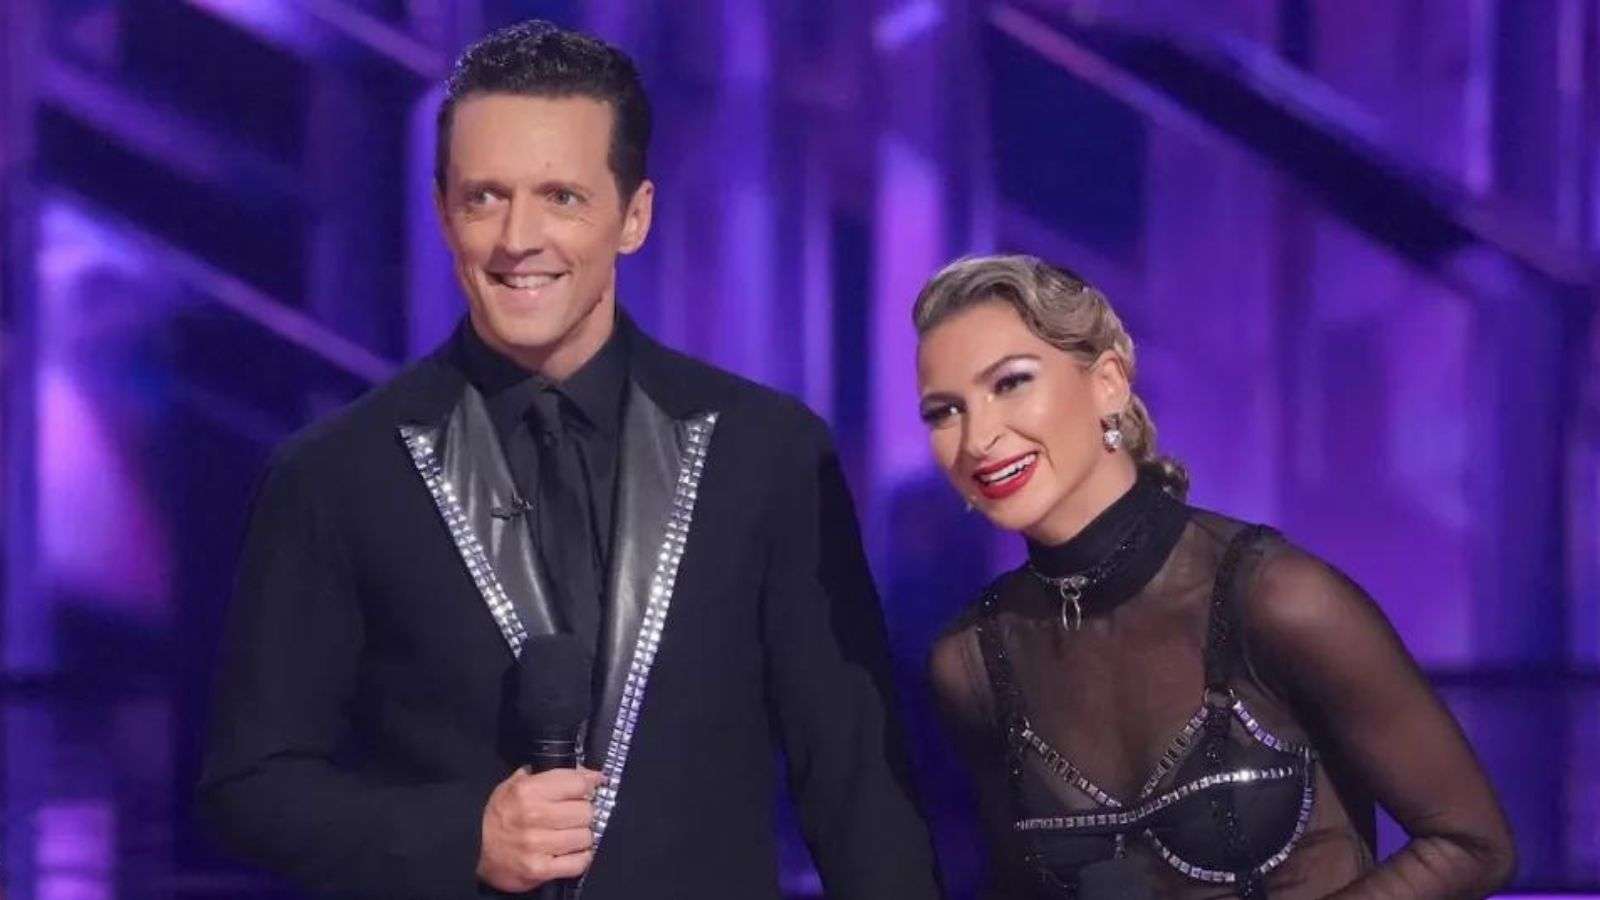 Daniella and Jason from Dancing With The Stars